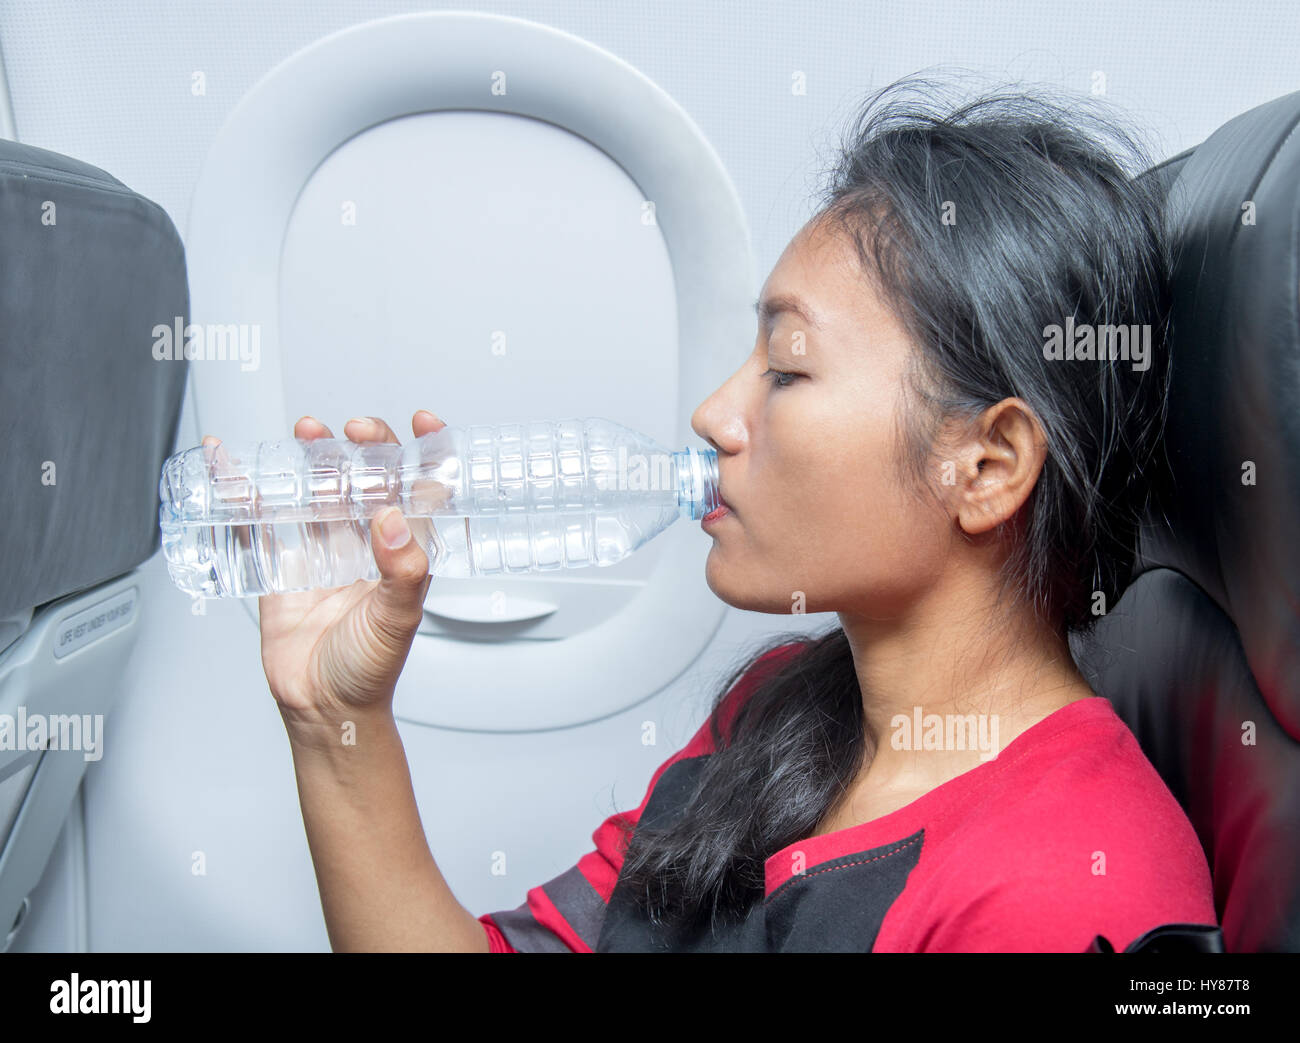 https://c8.alamy.com/comp/HY87T8/woman-in-aircraft-drinks-water-from-a-plastic-bottle-a-passenger-plane-HY87T8.jpg